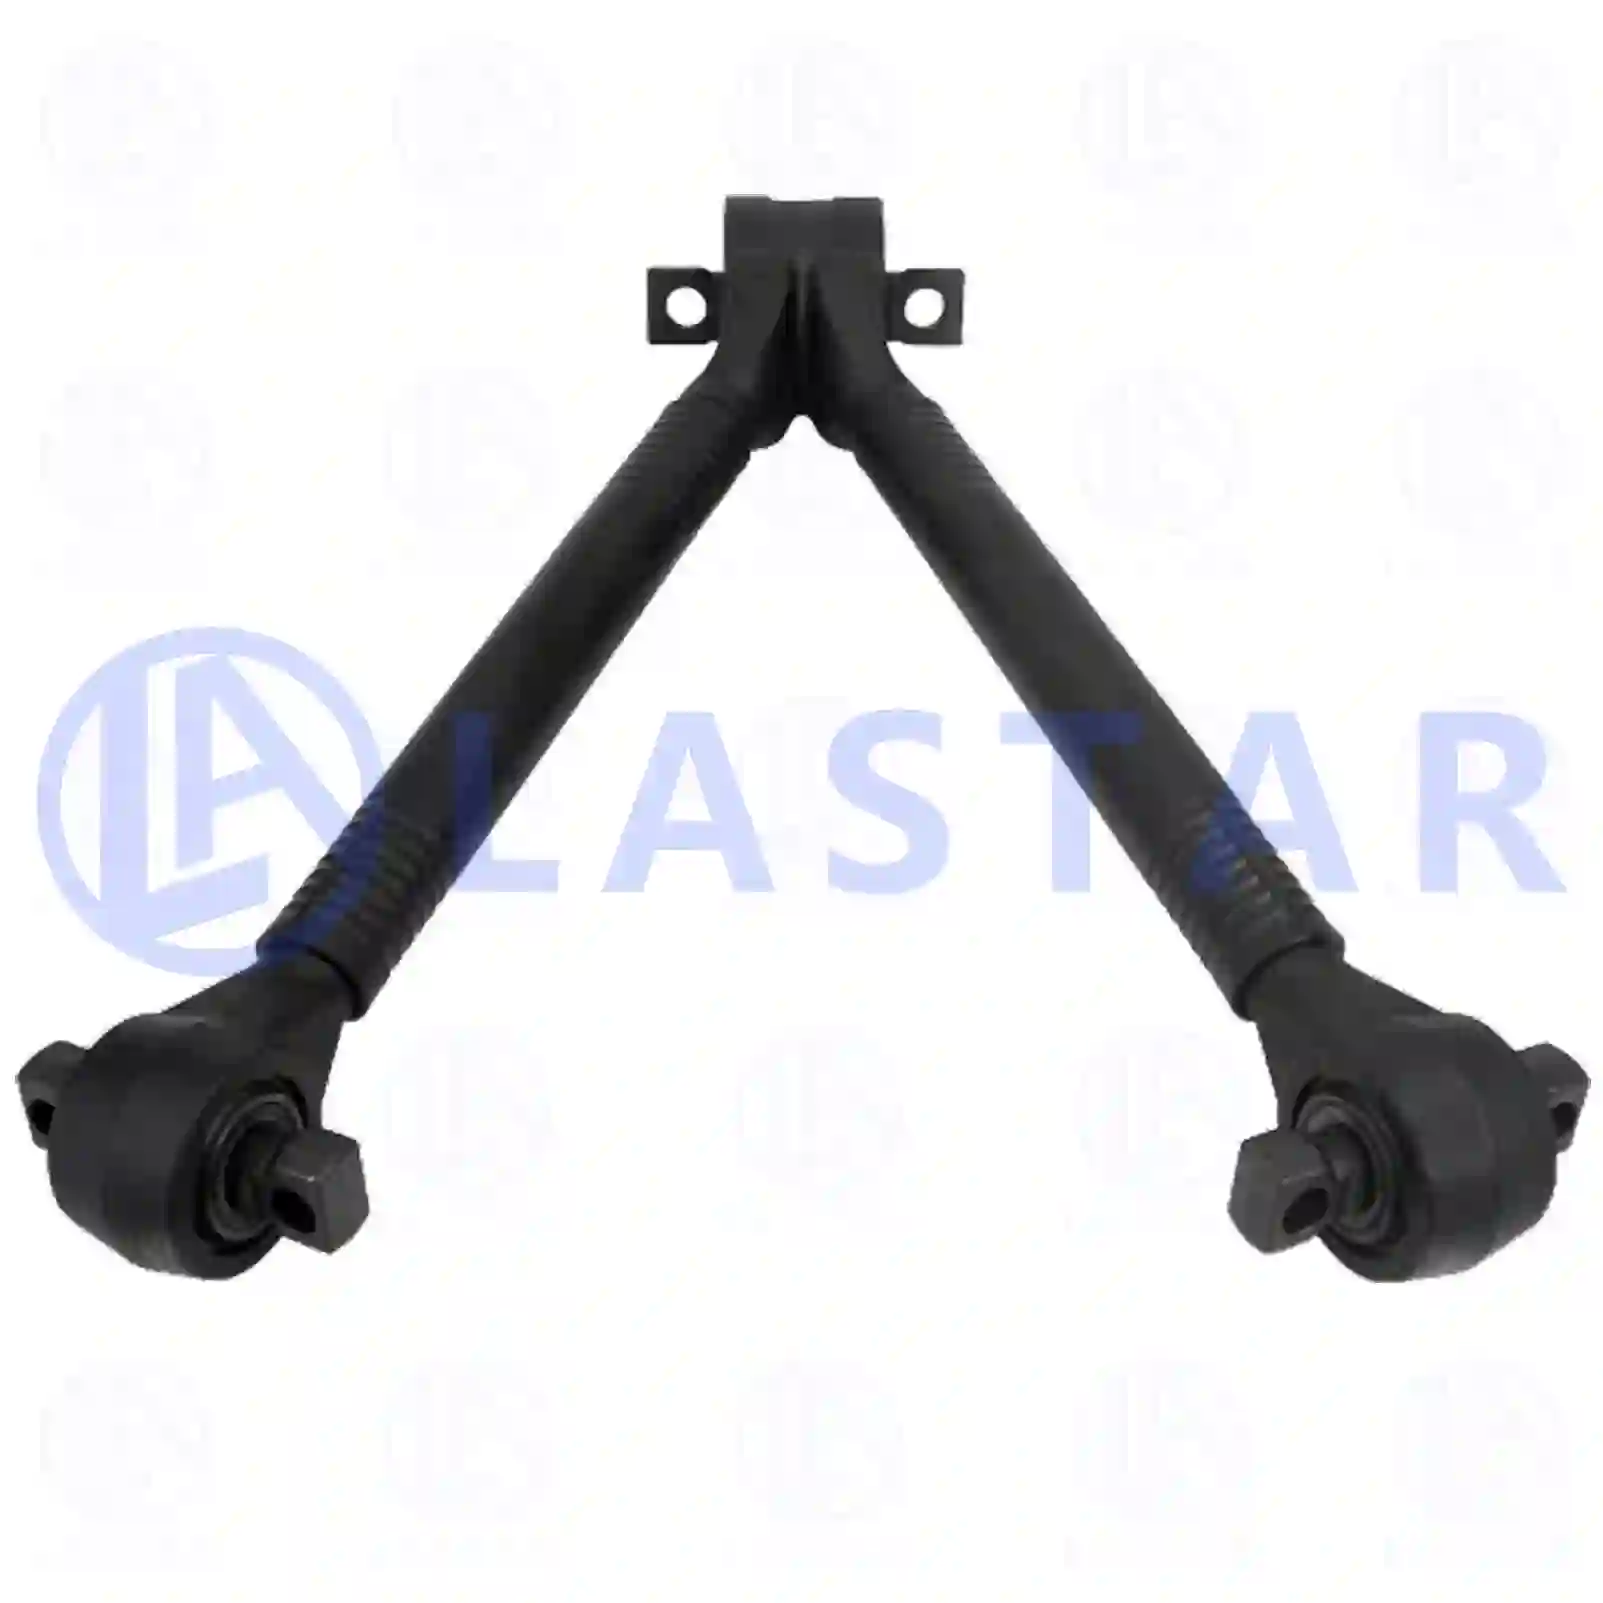 V-stay, 77727110, 9483502805, 9483502805, ||  77727110 Lastar Spare Part | Truck Spare Parts, Auotomotive Spare Parts V-stay, 77727110, 9483502805, 9483502805, ||  77727110 Lastar Spare Part | Truck Spare Parts, Auotomotive Spare Parts